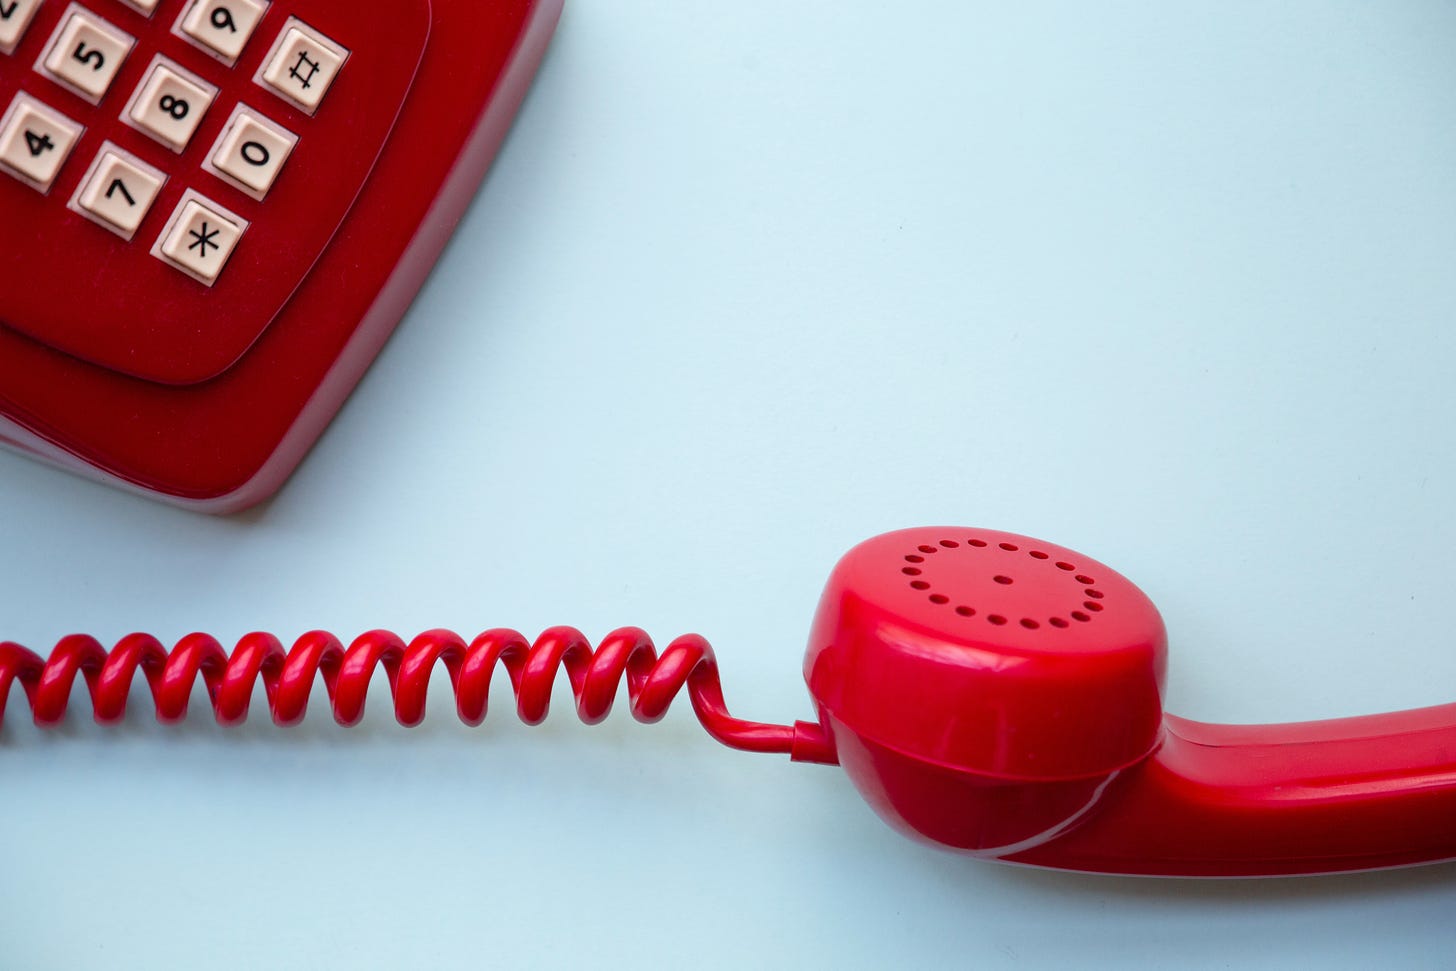 red rotary phone with red cord